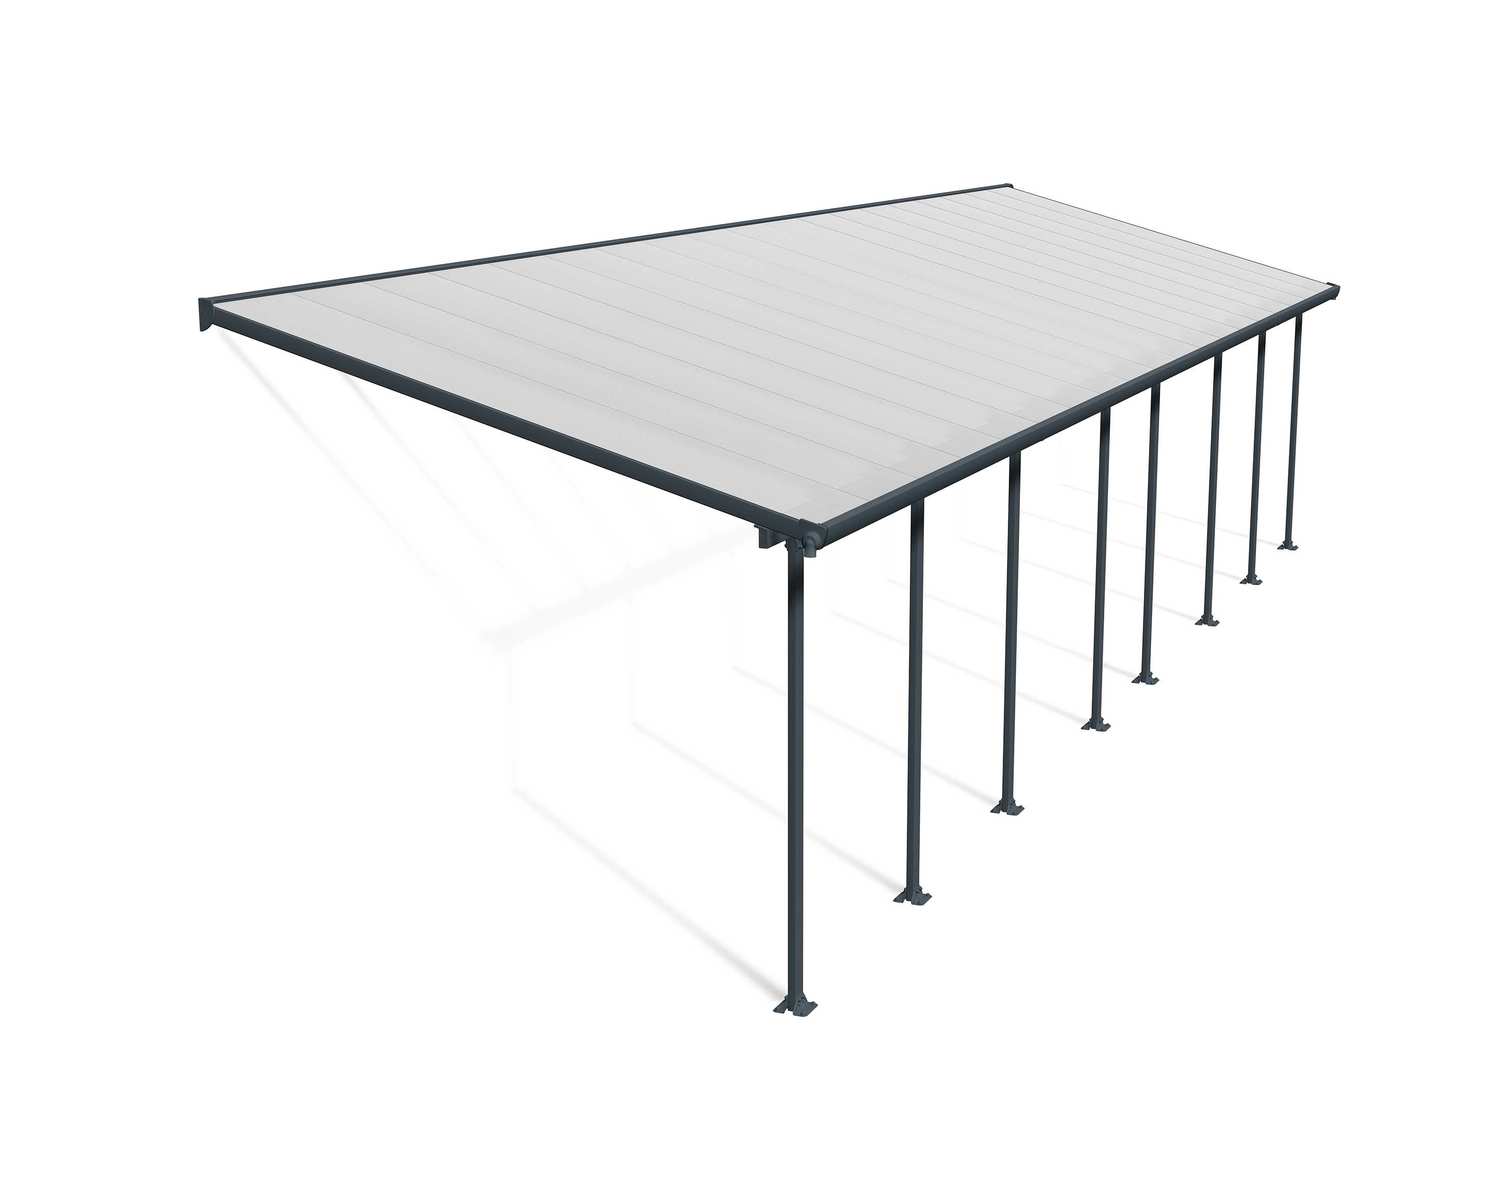 Feria 10 ft. x 34 ft. Grey Aluminium Patio Cover With 8 Posts, Clear Twin-Wall Polycarbonate Roof Panels.